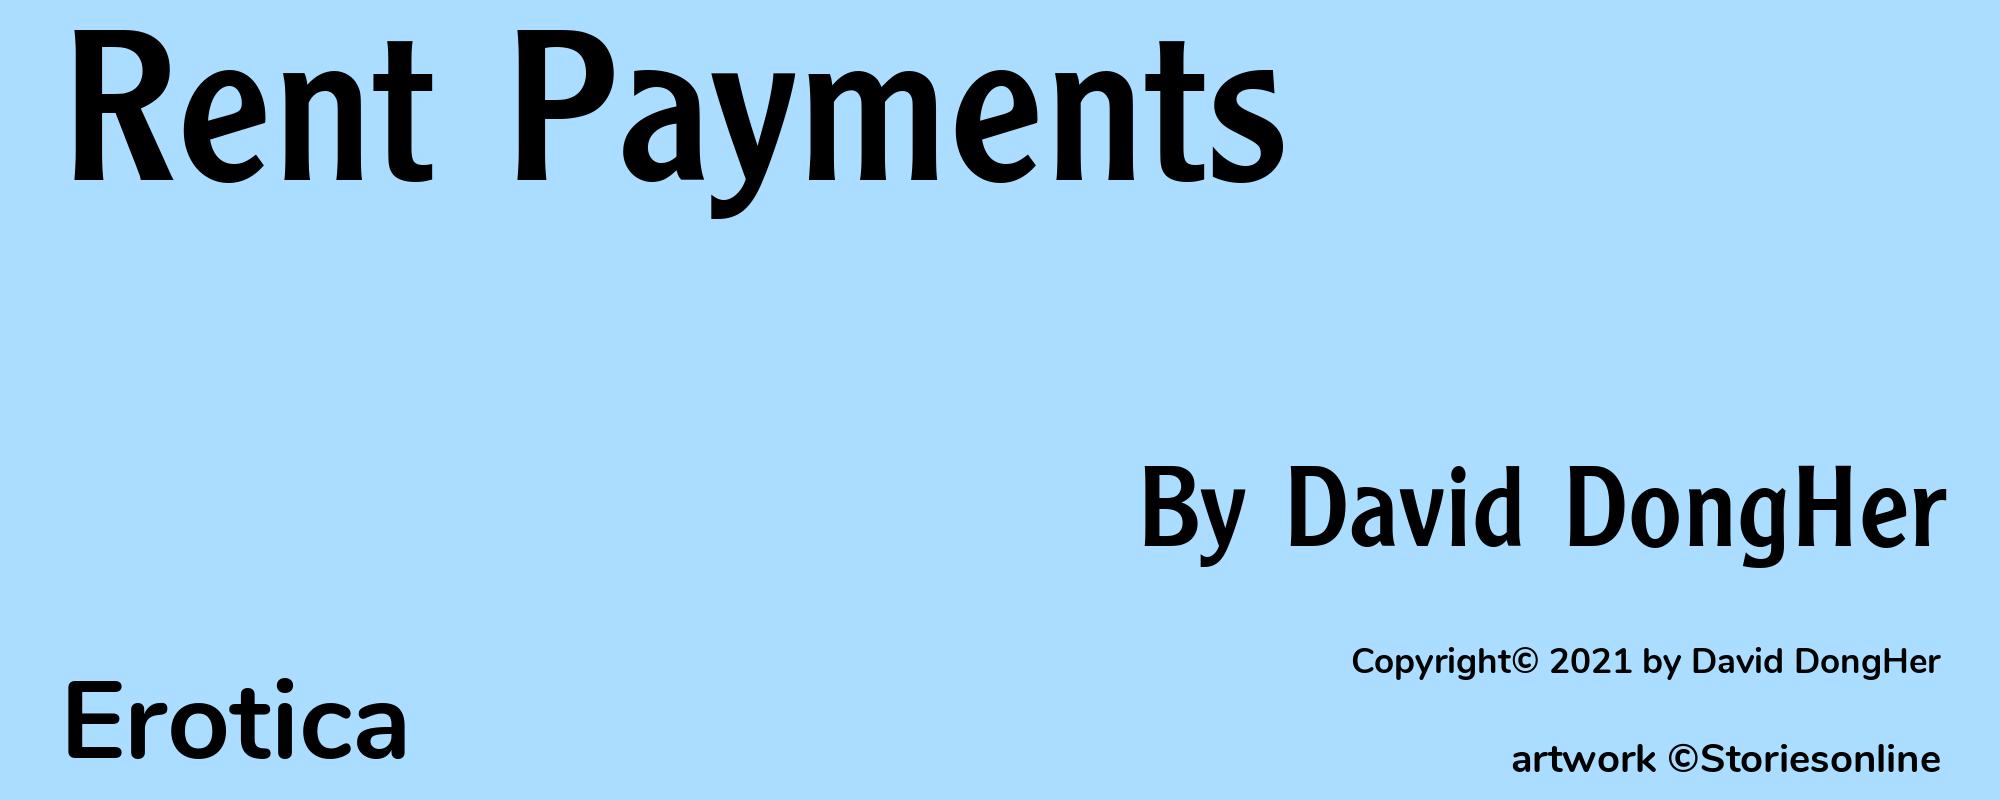 Rent Payments - Cover